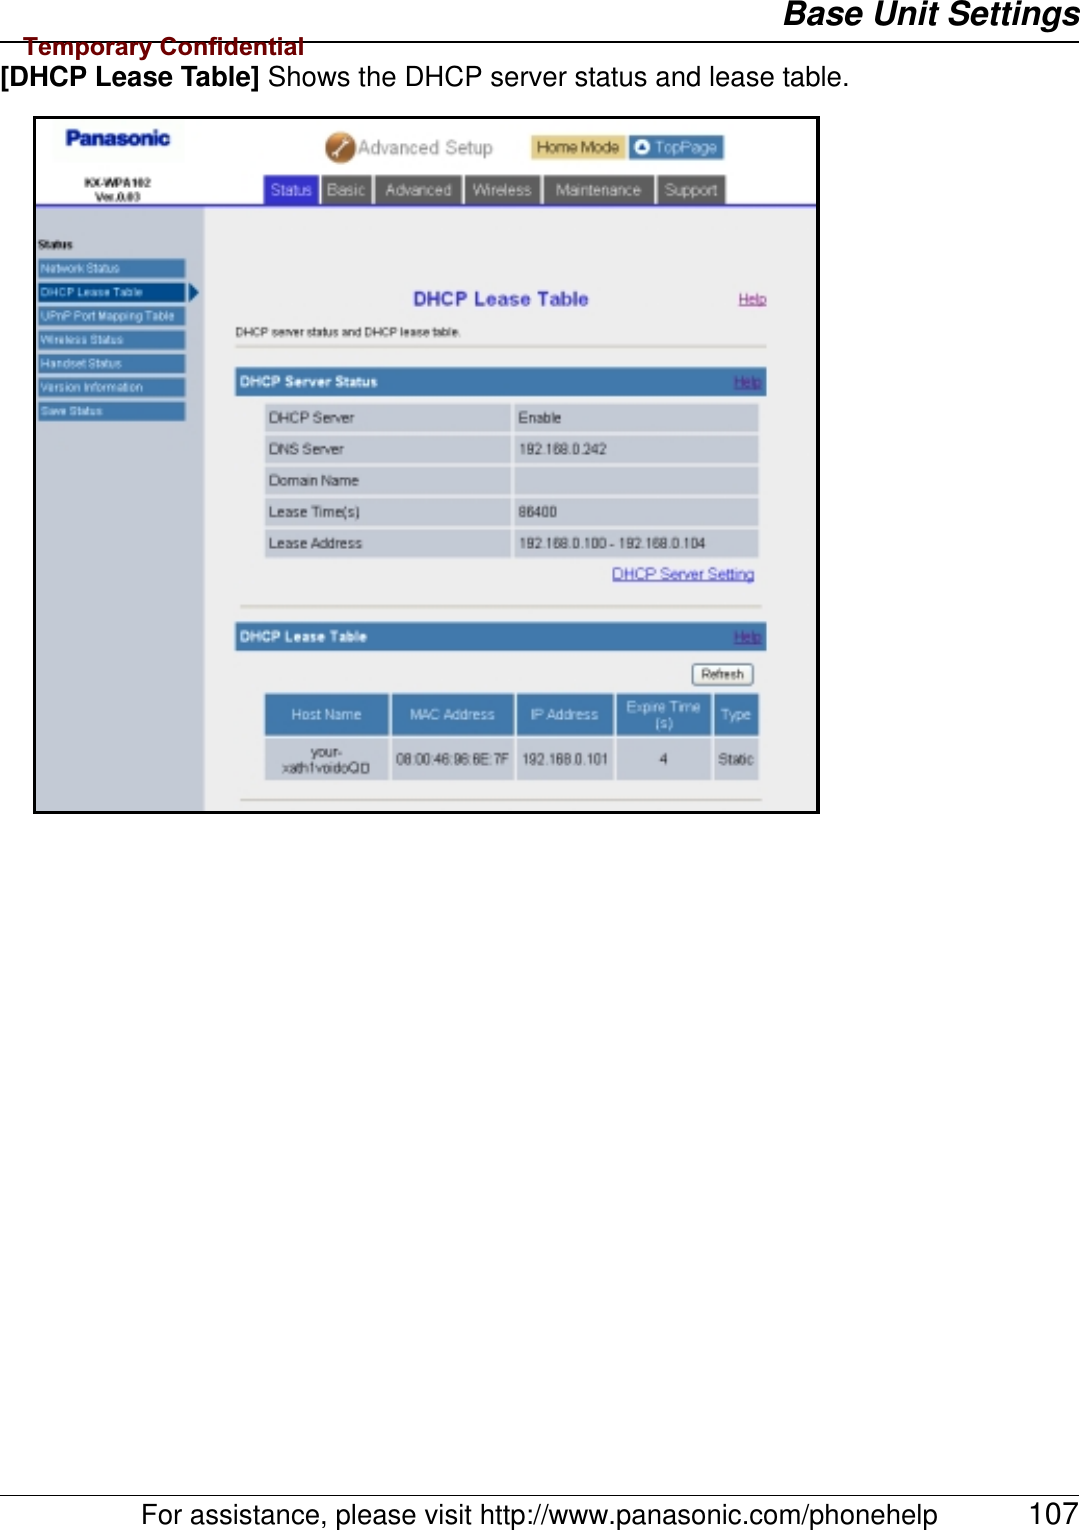 Base Unit SettingsFor assistance, please visit http://www.panasonic.com/phonehelp 107[DHCP Lease Table] Shows the DHCP server status and lease table.Temporary Confidential